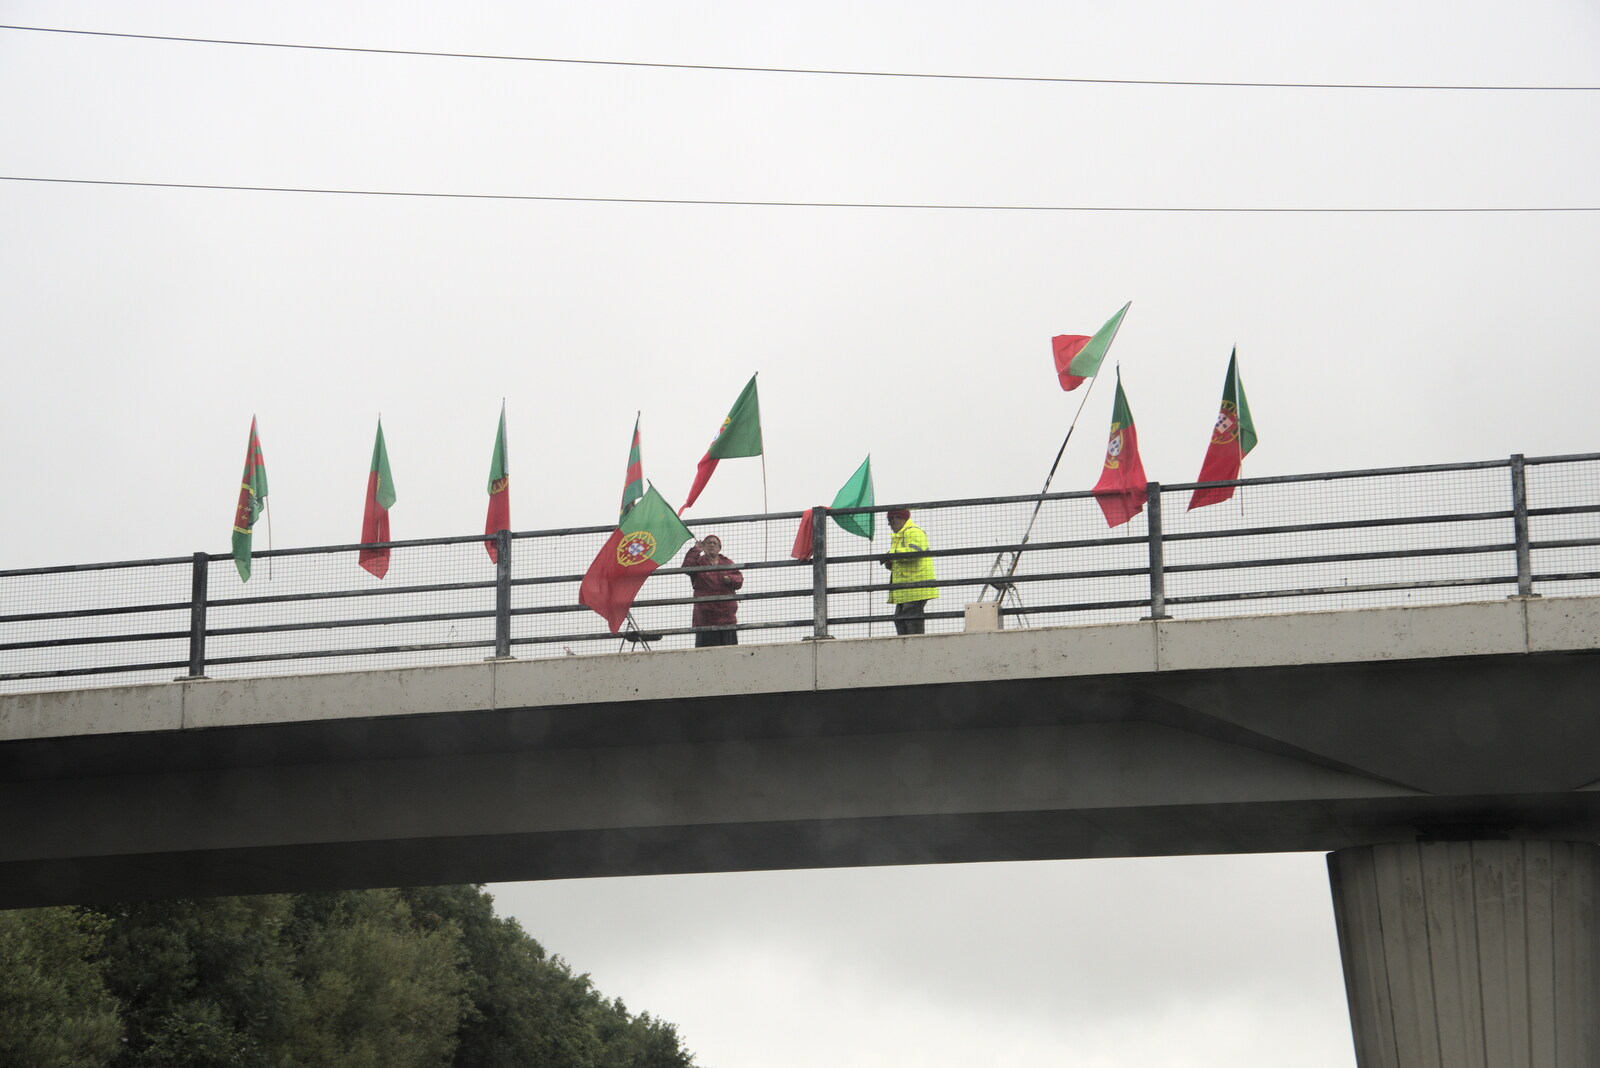 Some GAA fans cause a traffic jam on the M4 from Manorhamilton and the Street Art of Dún Laoghaire, Ireland - 15th August 2021